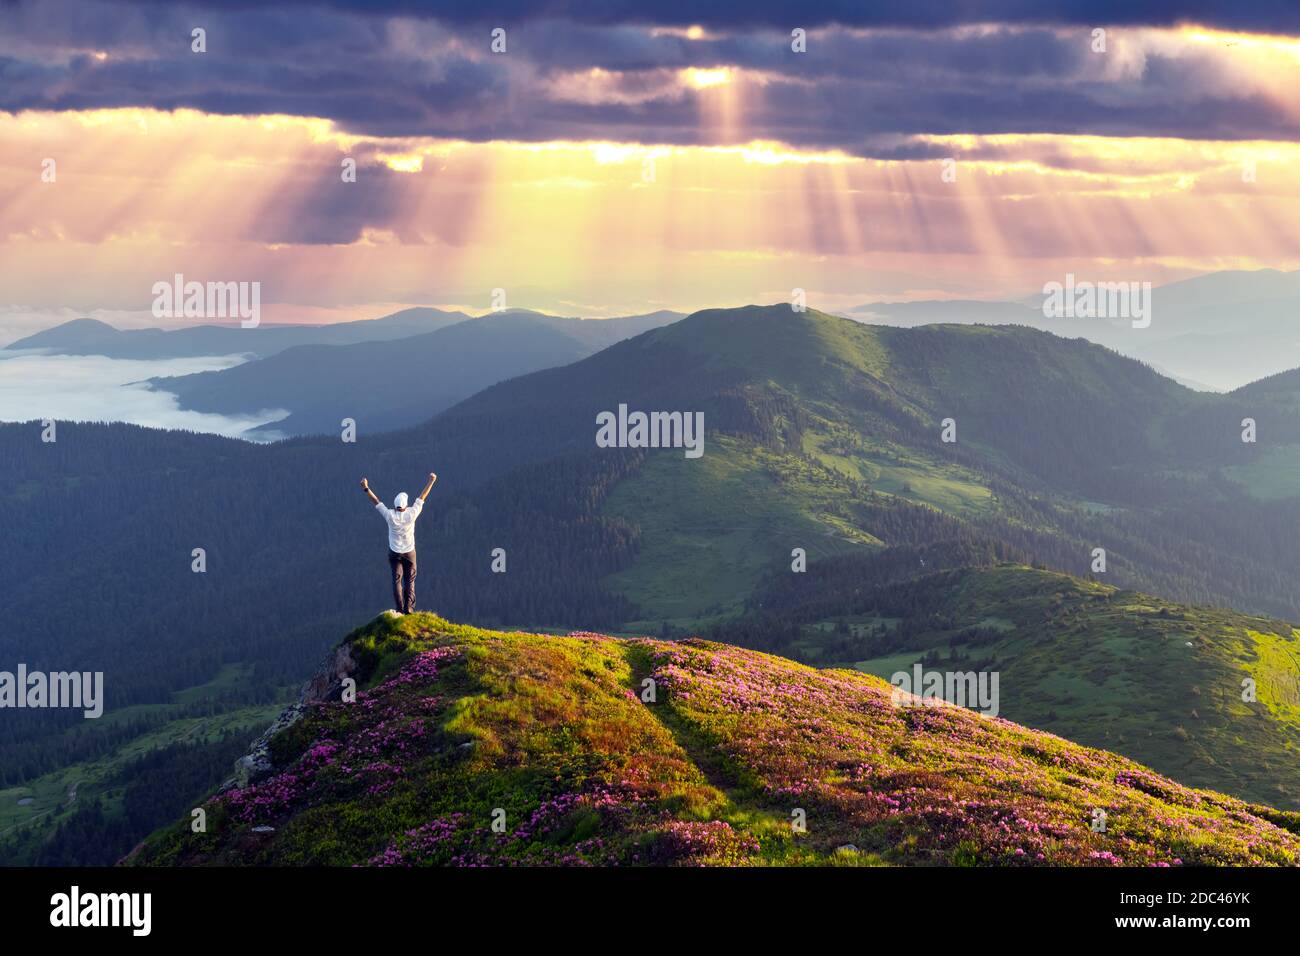 A tourist in white shirt on the edge of a cliff covered with a pink carpet of rhododendron flowers in the summer. Foggy mountains on the background. Landscape photography Stock Photo